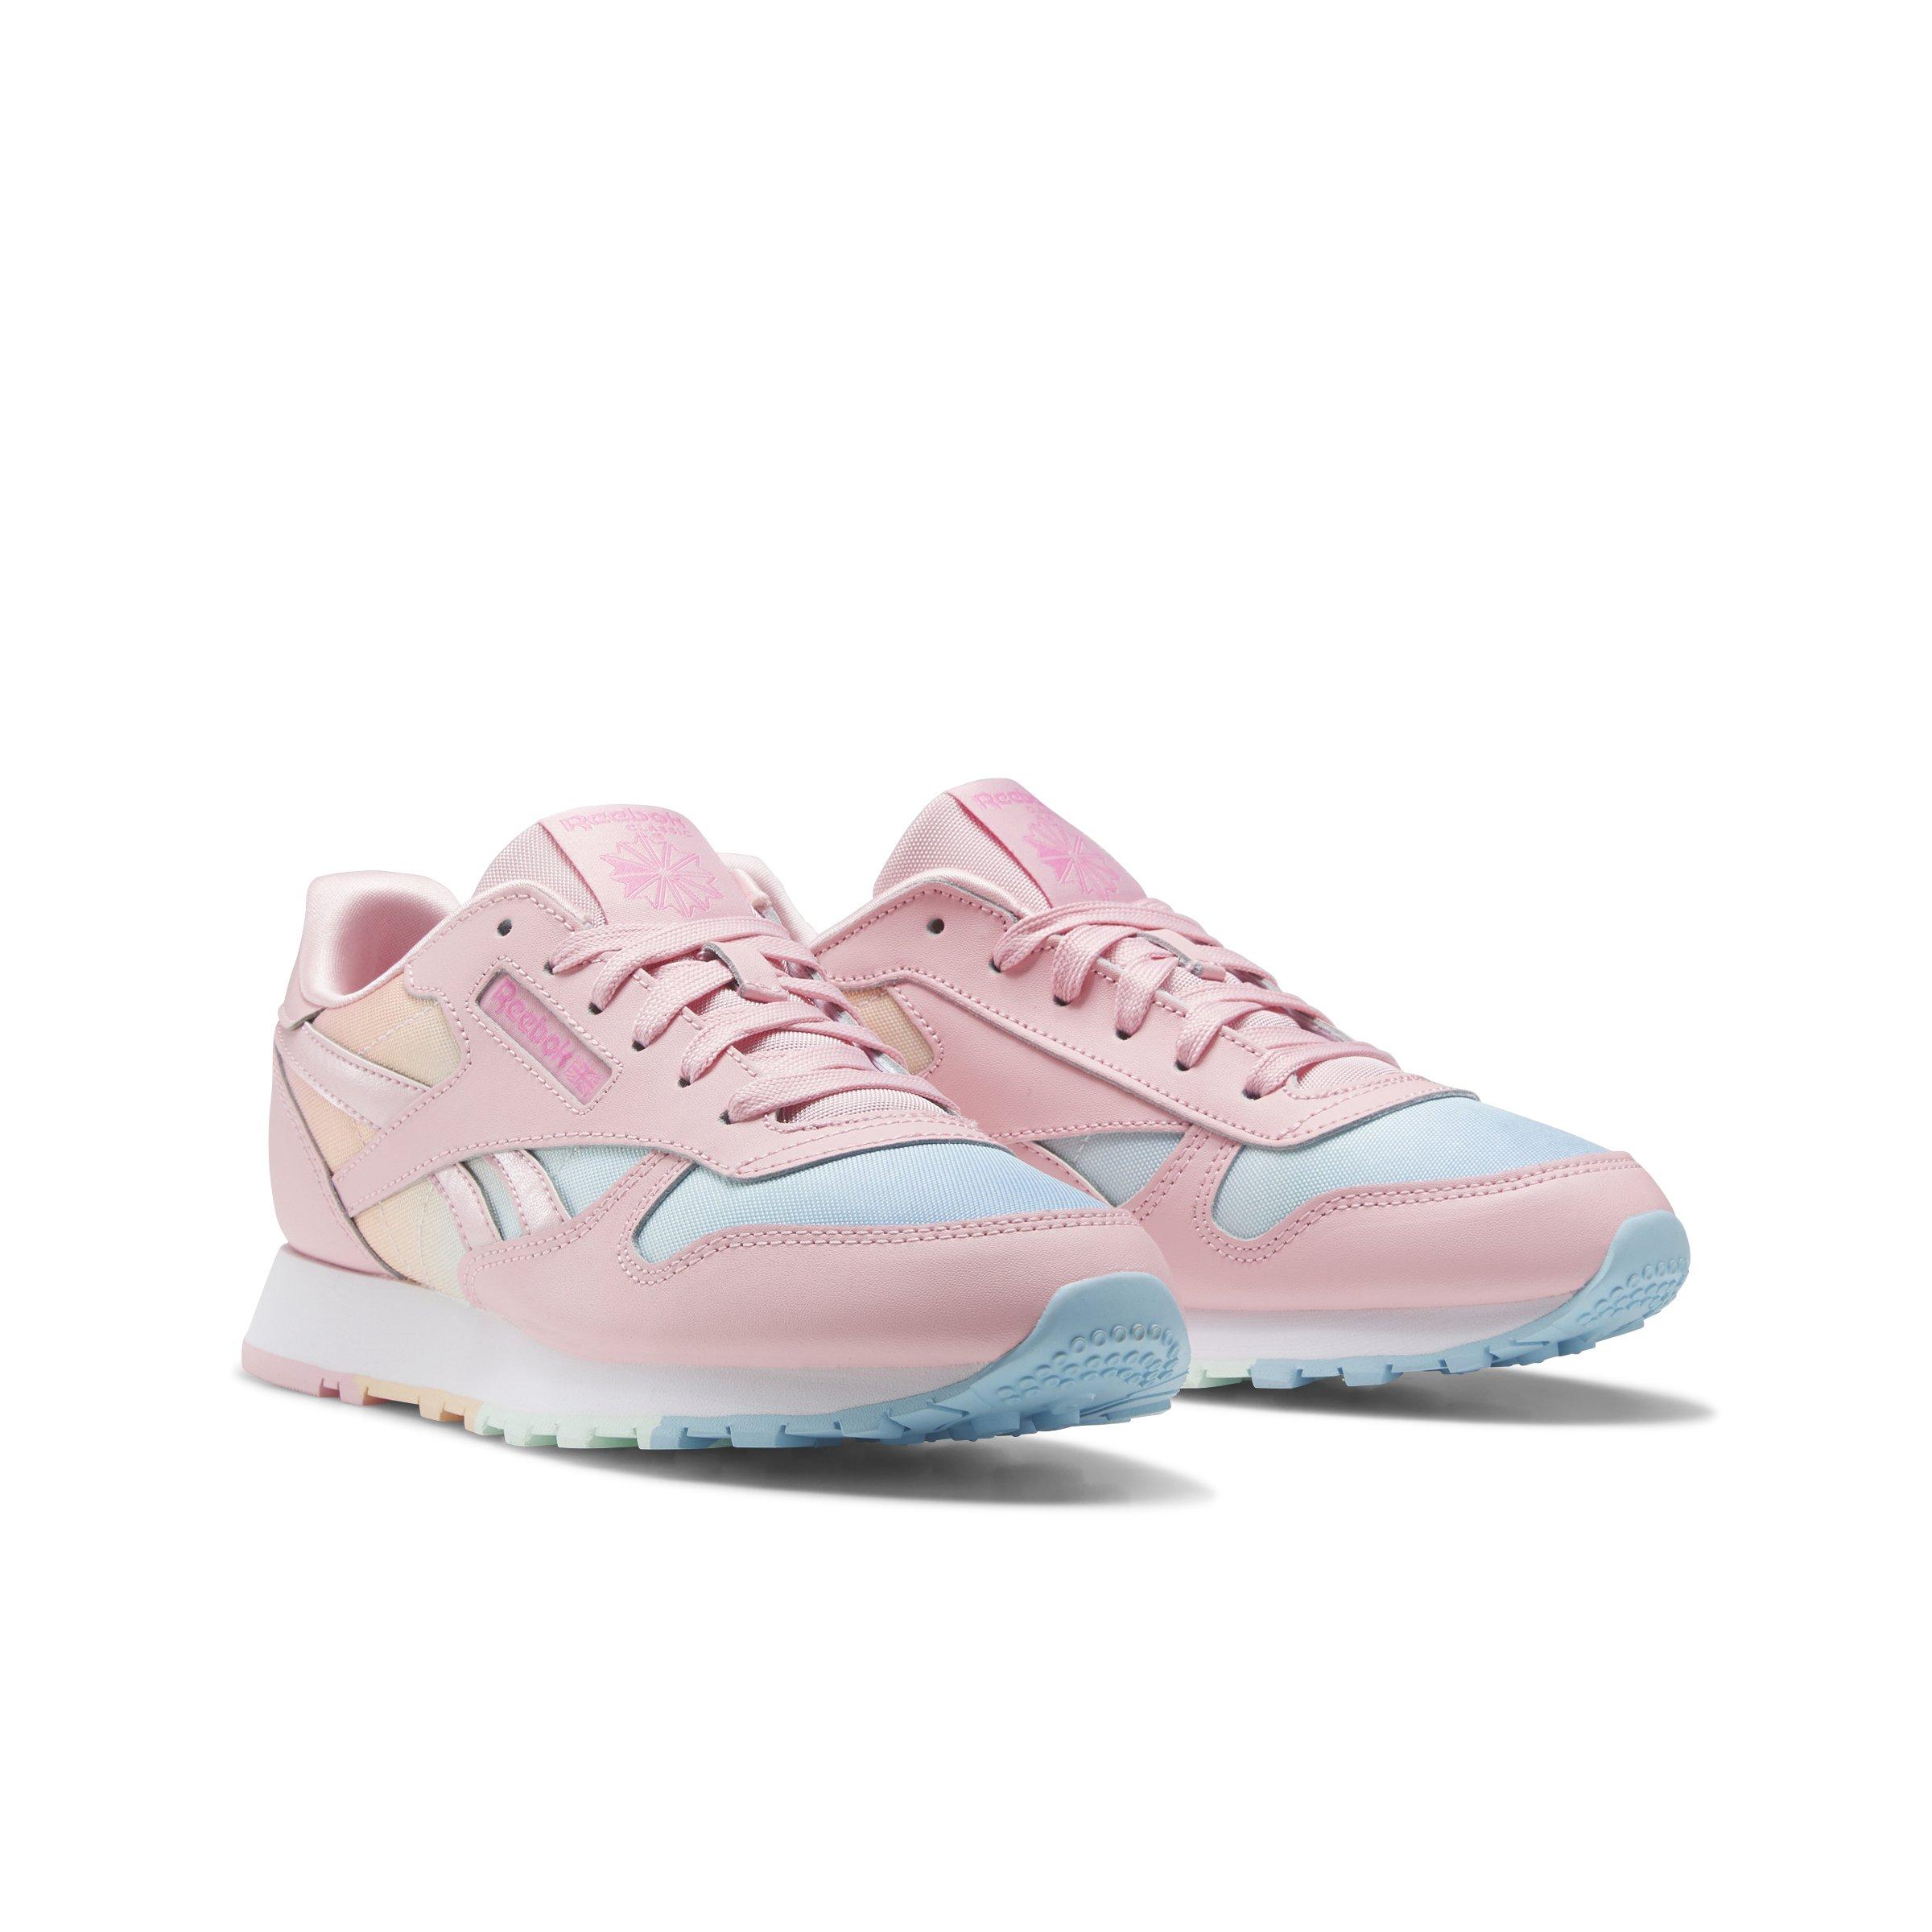 Reebok Classic Leather "Pink Toddler Girls' Shoe - City Gear